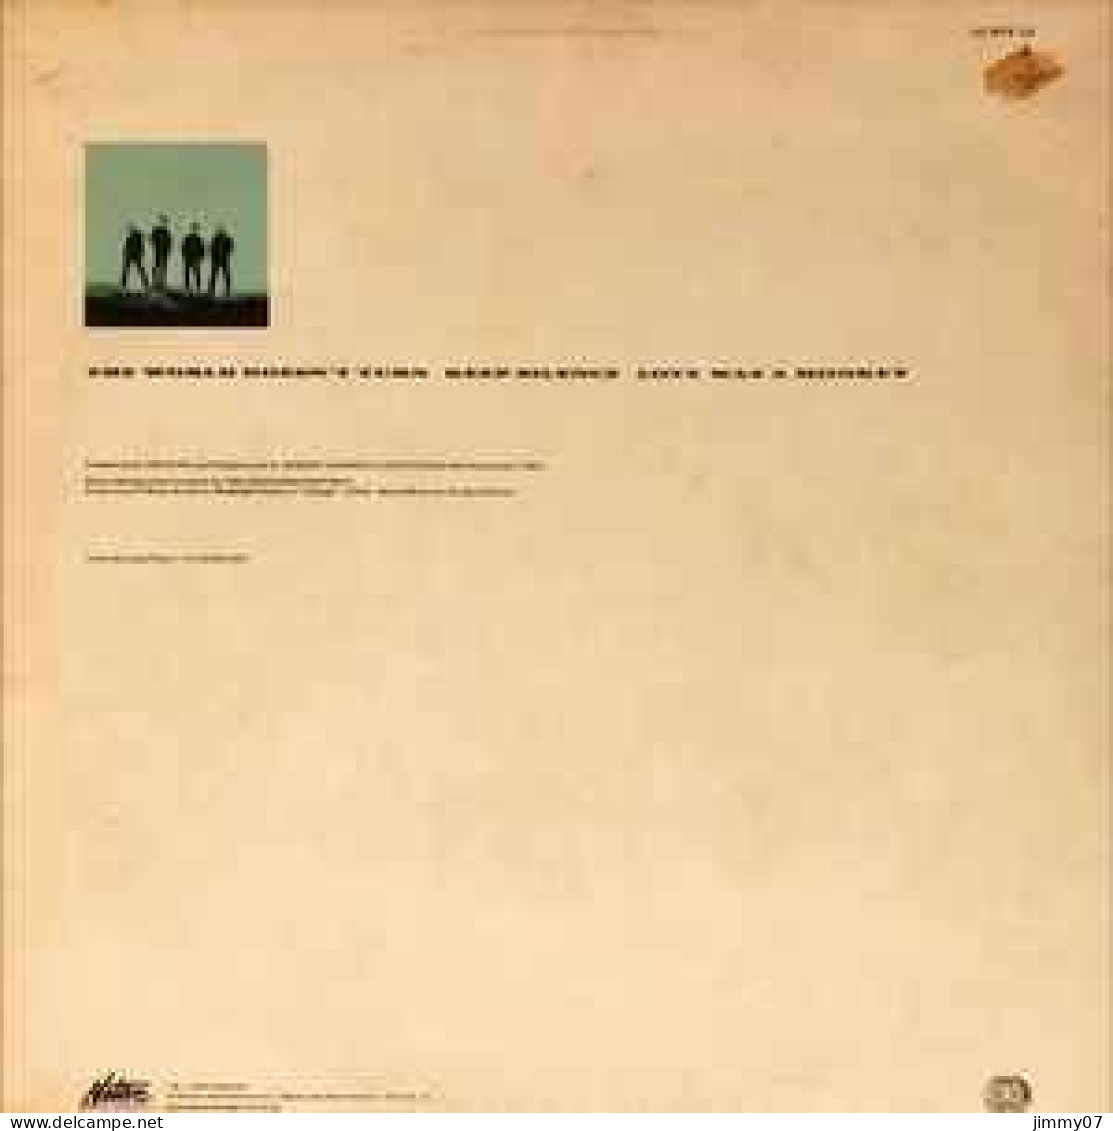 The Junk - The World Doesn't Turn (12") - 45 T - Maxi-Single